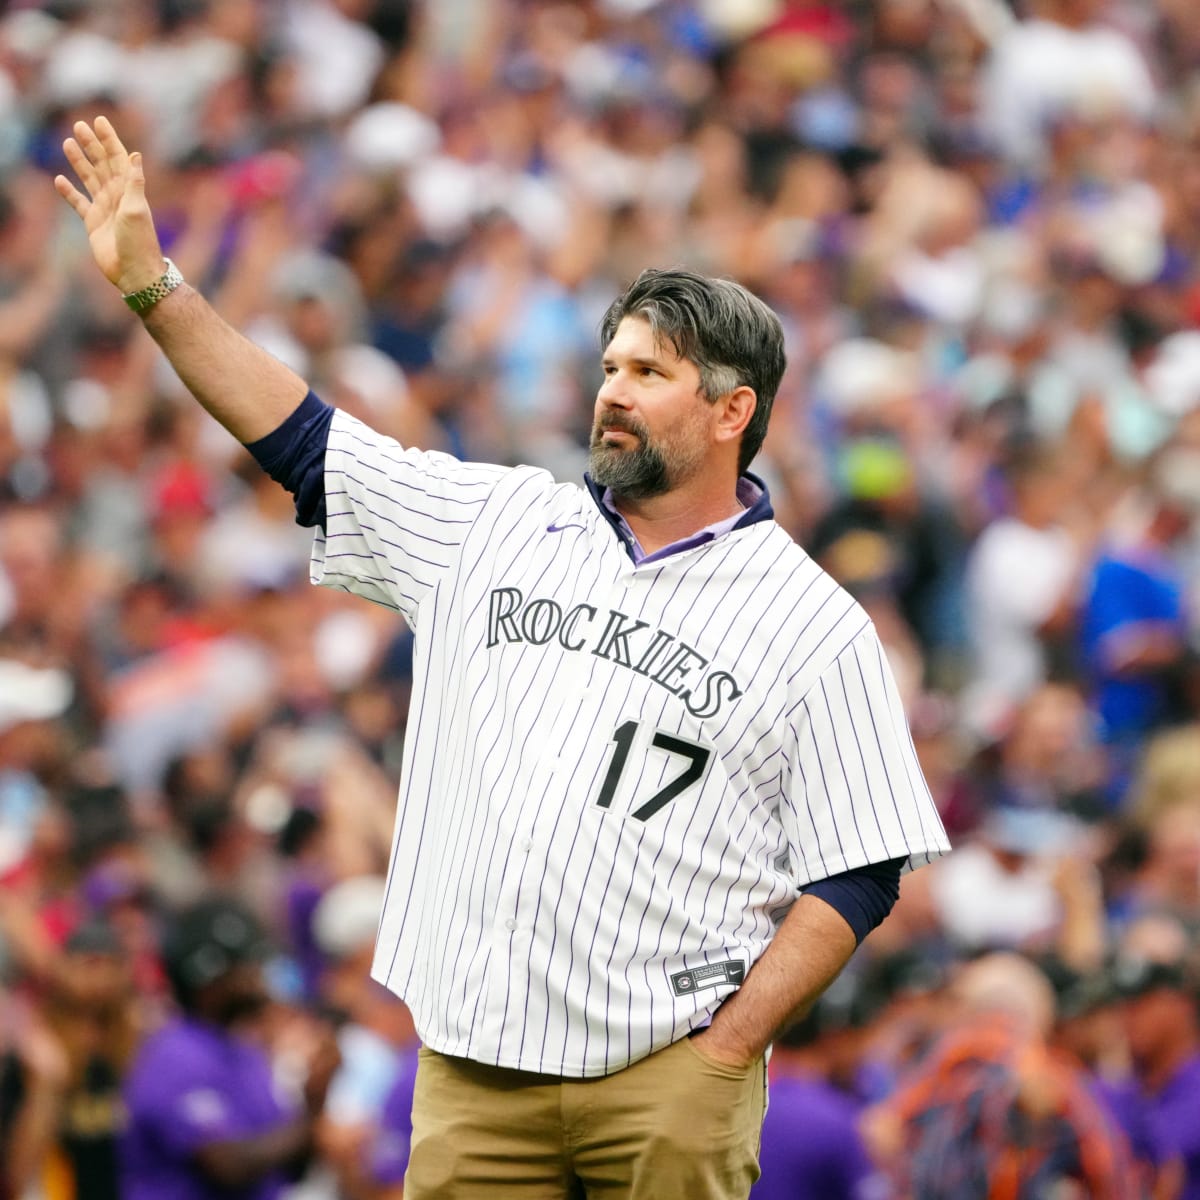 Colorado Rockies Legend Todd Helton Joins Forces With Charity to